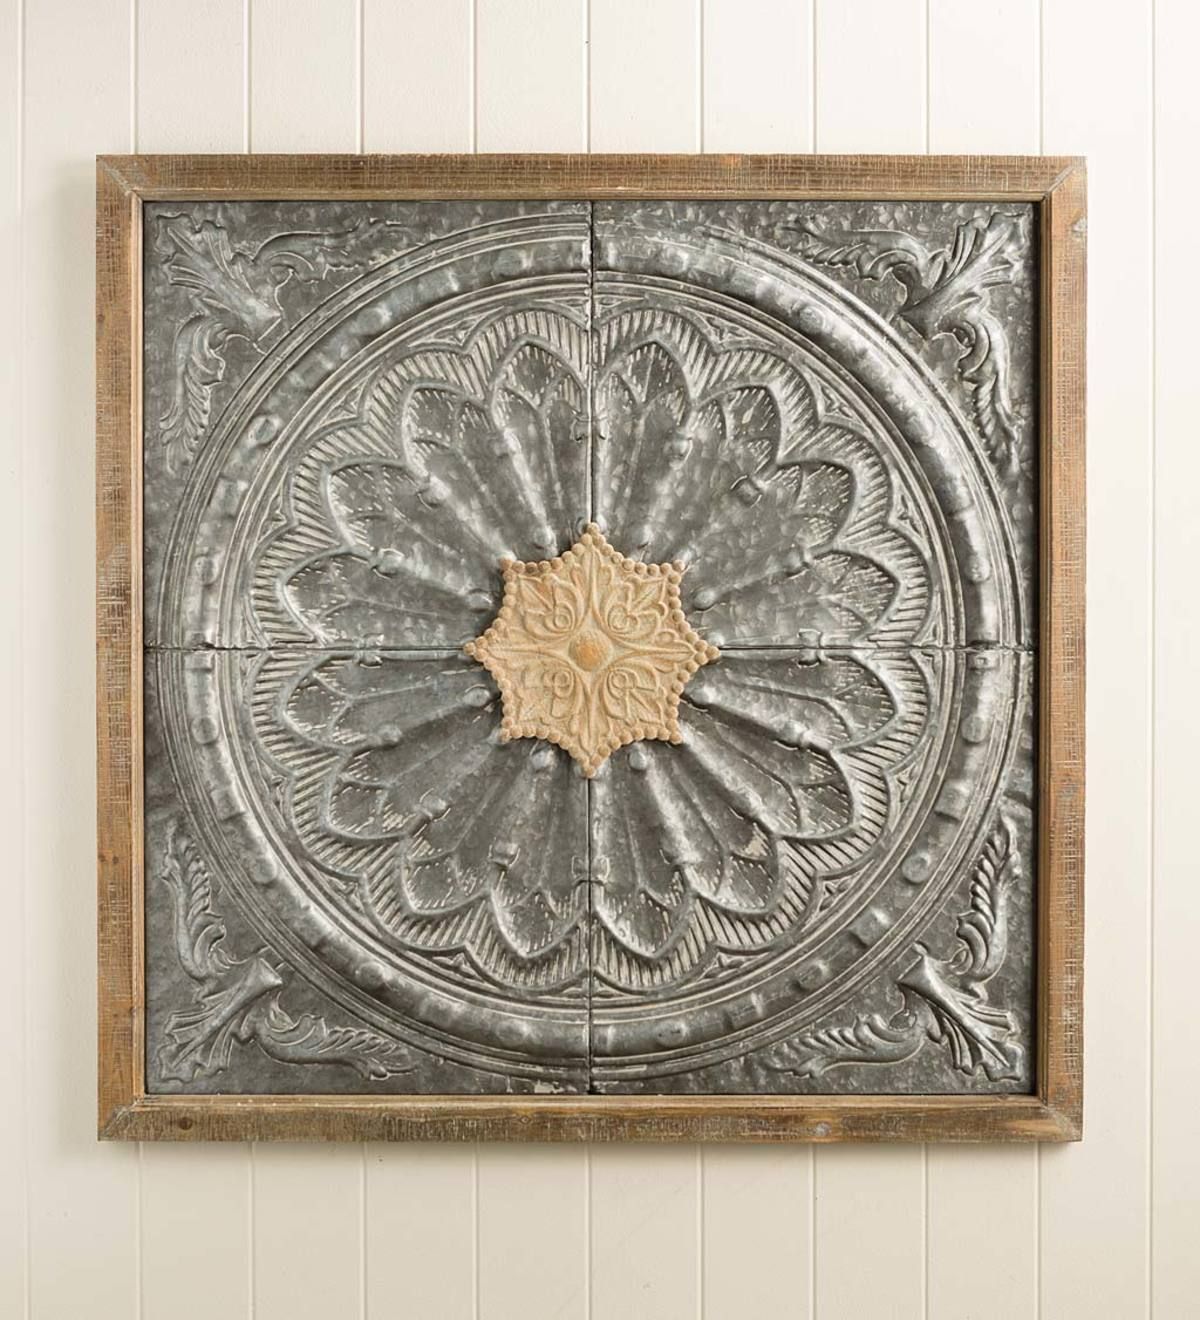 Antiqued Metal Medallion Wall Art Is A Statement Piece For Your Home Within Recent Square Wall Art (View 8 of 20)